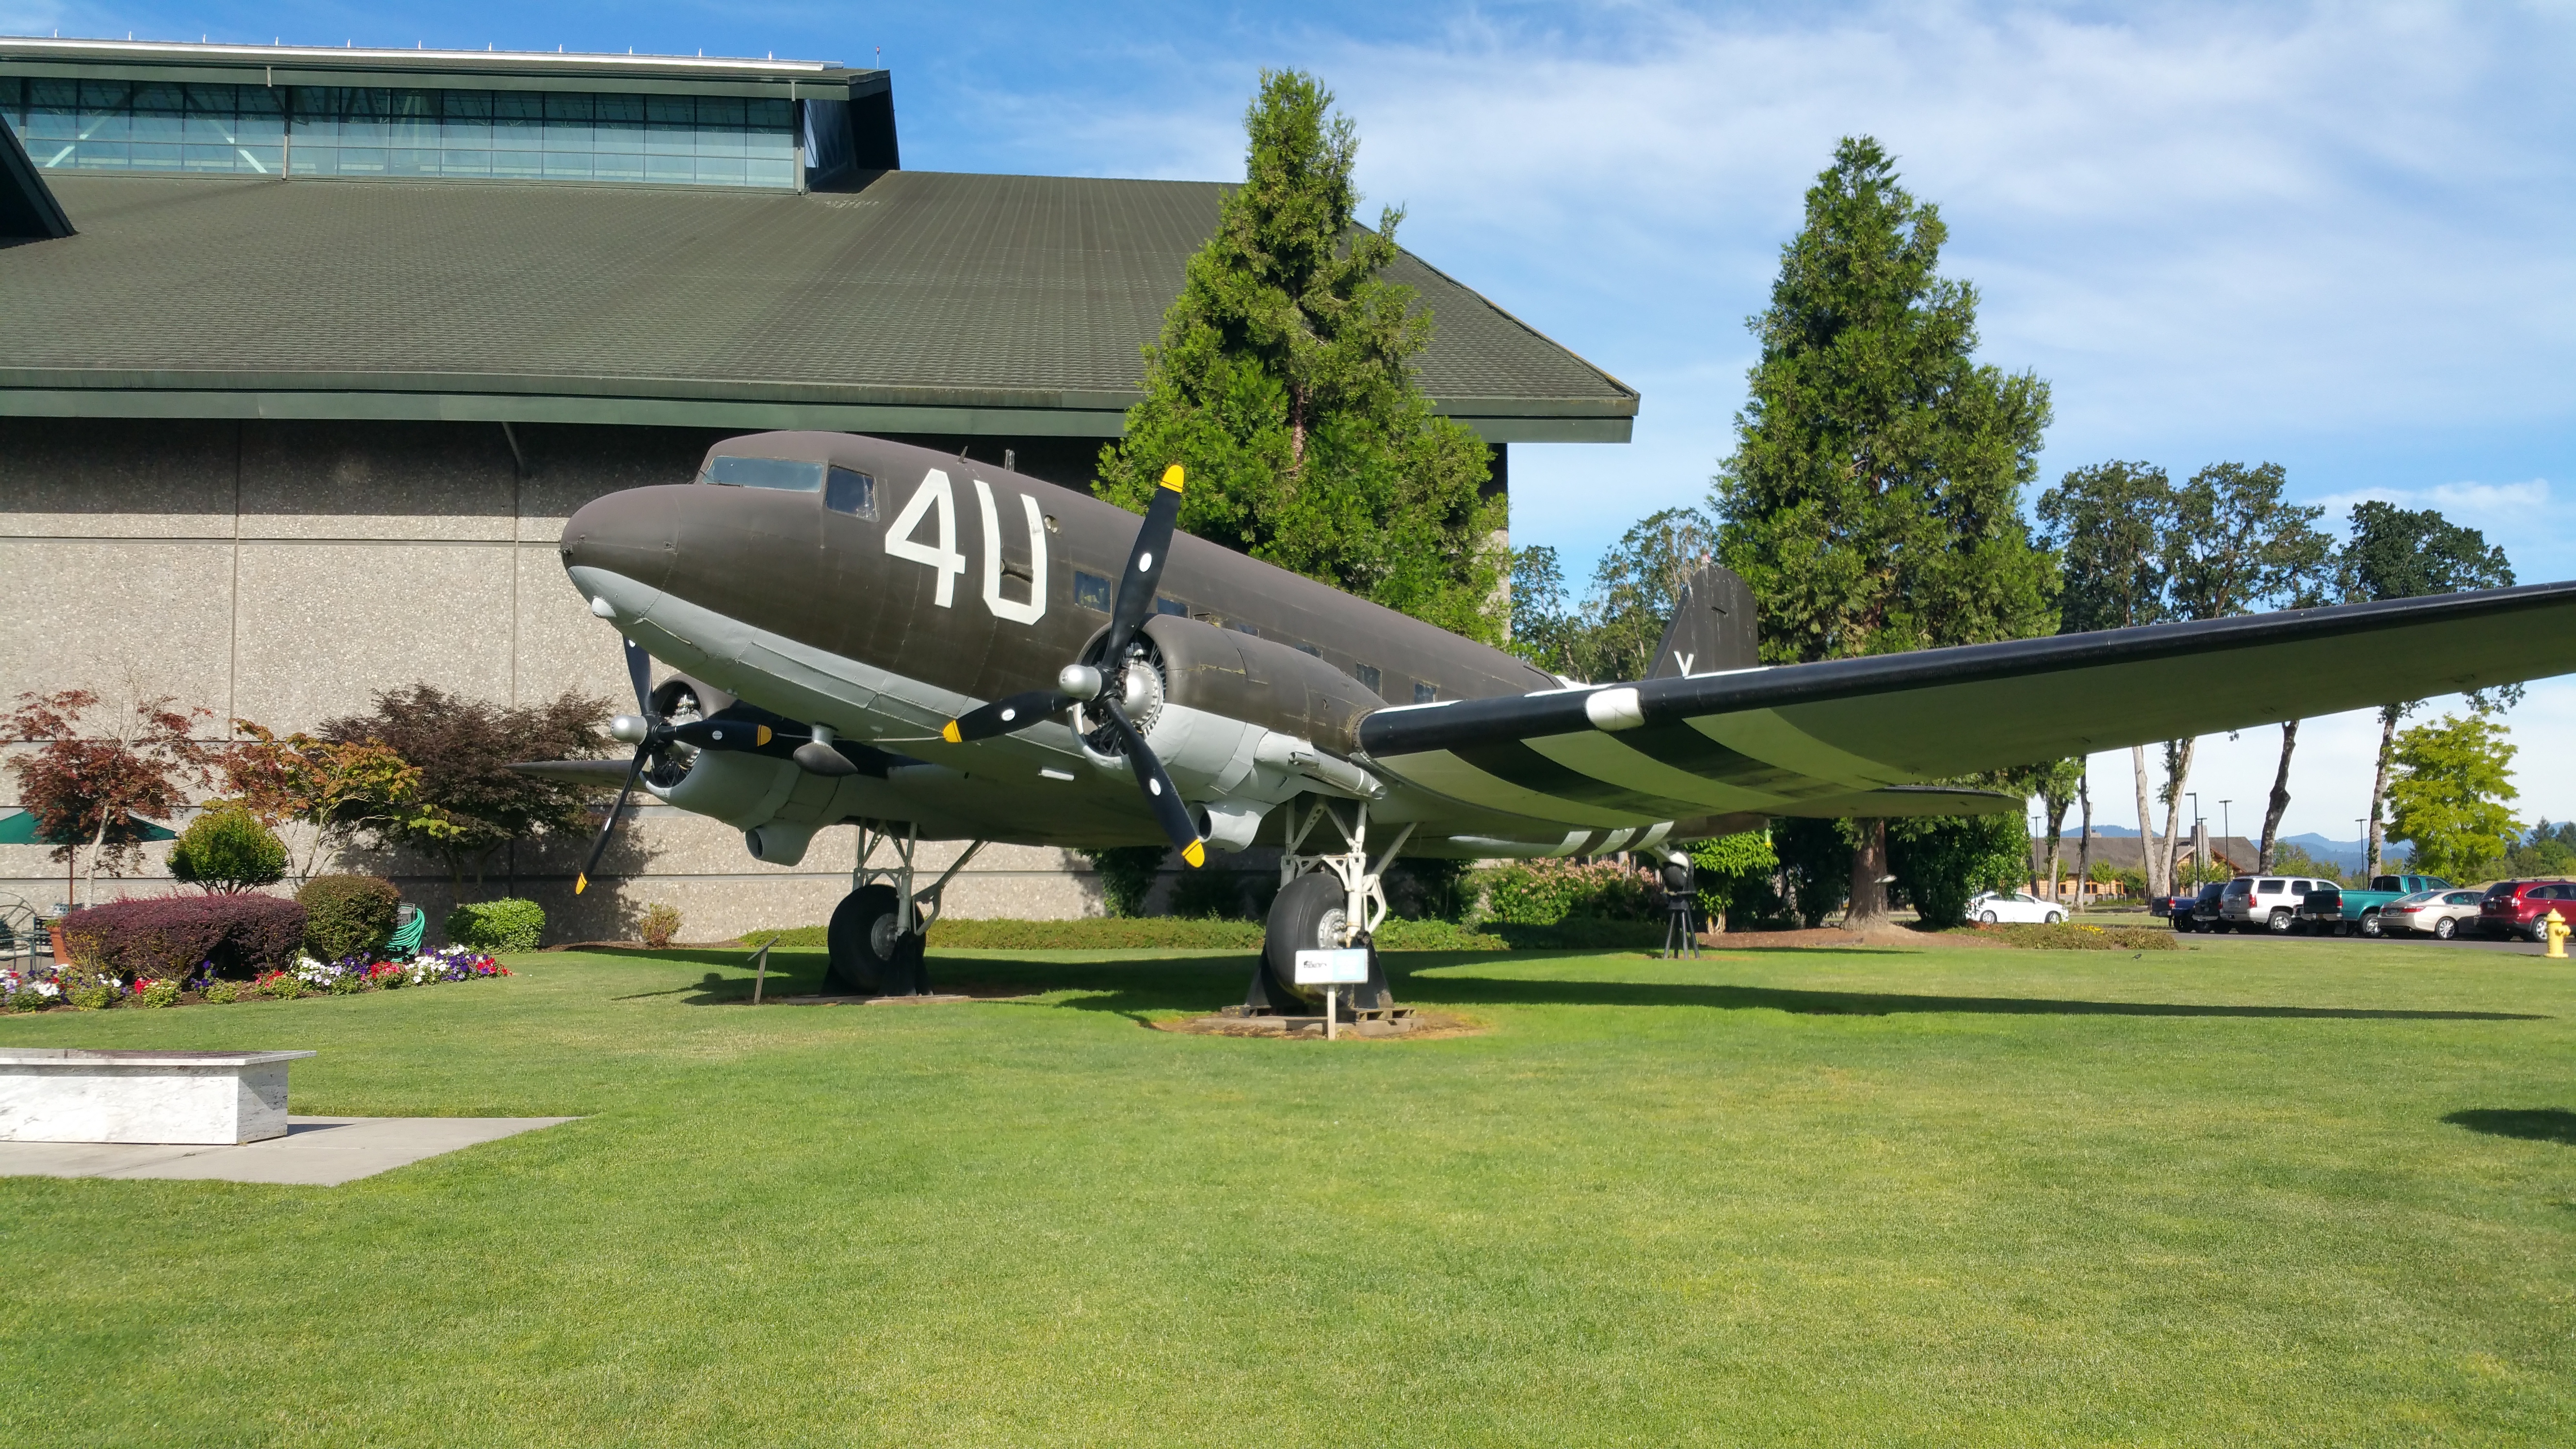 File:Douglas C-47A Skytrain at the Evergreen Aviation & Space